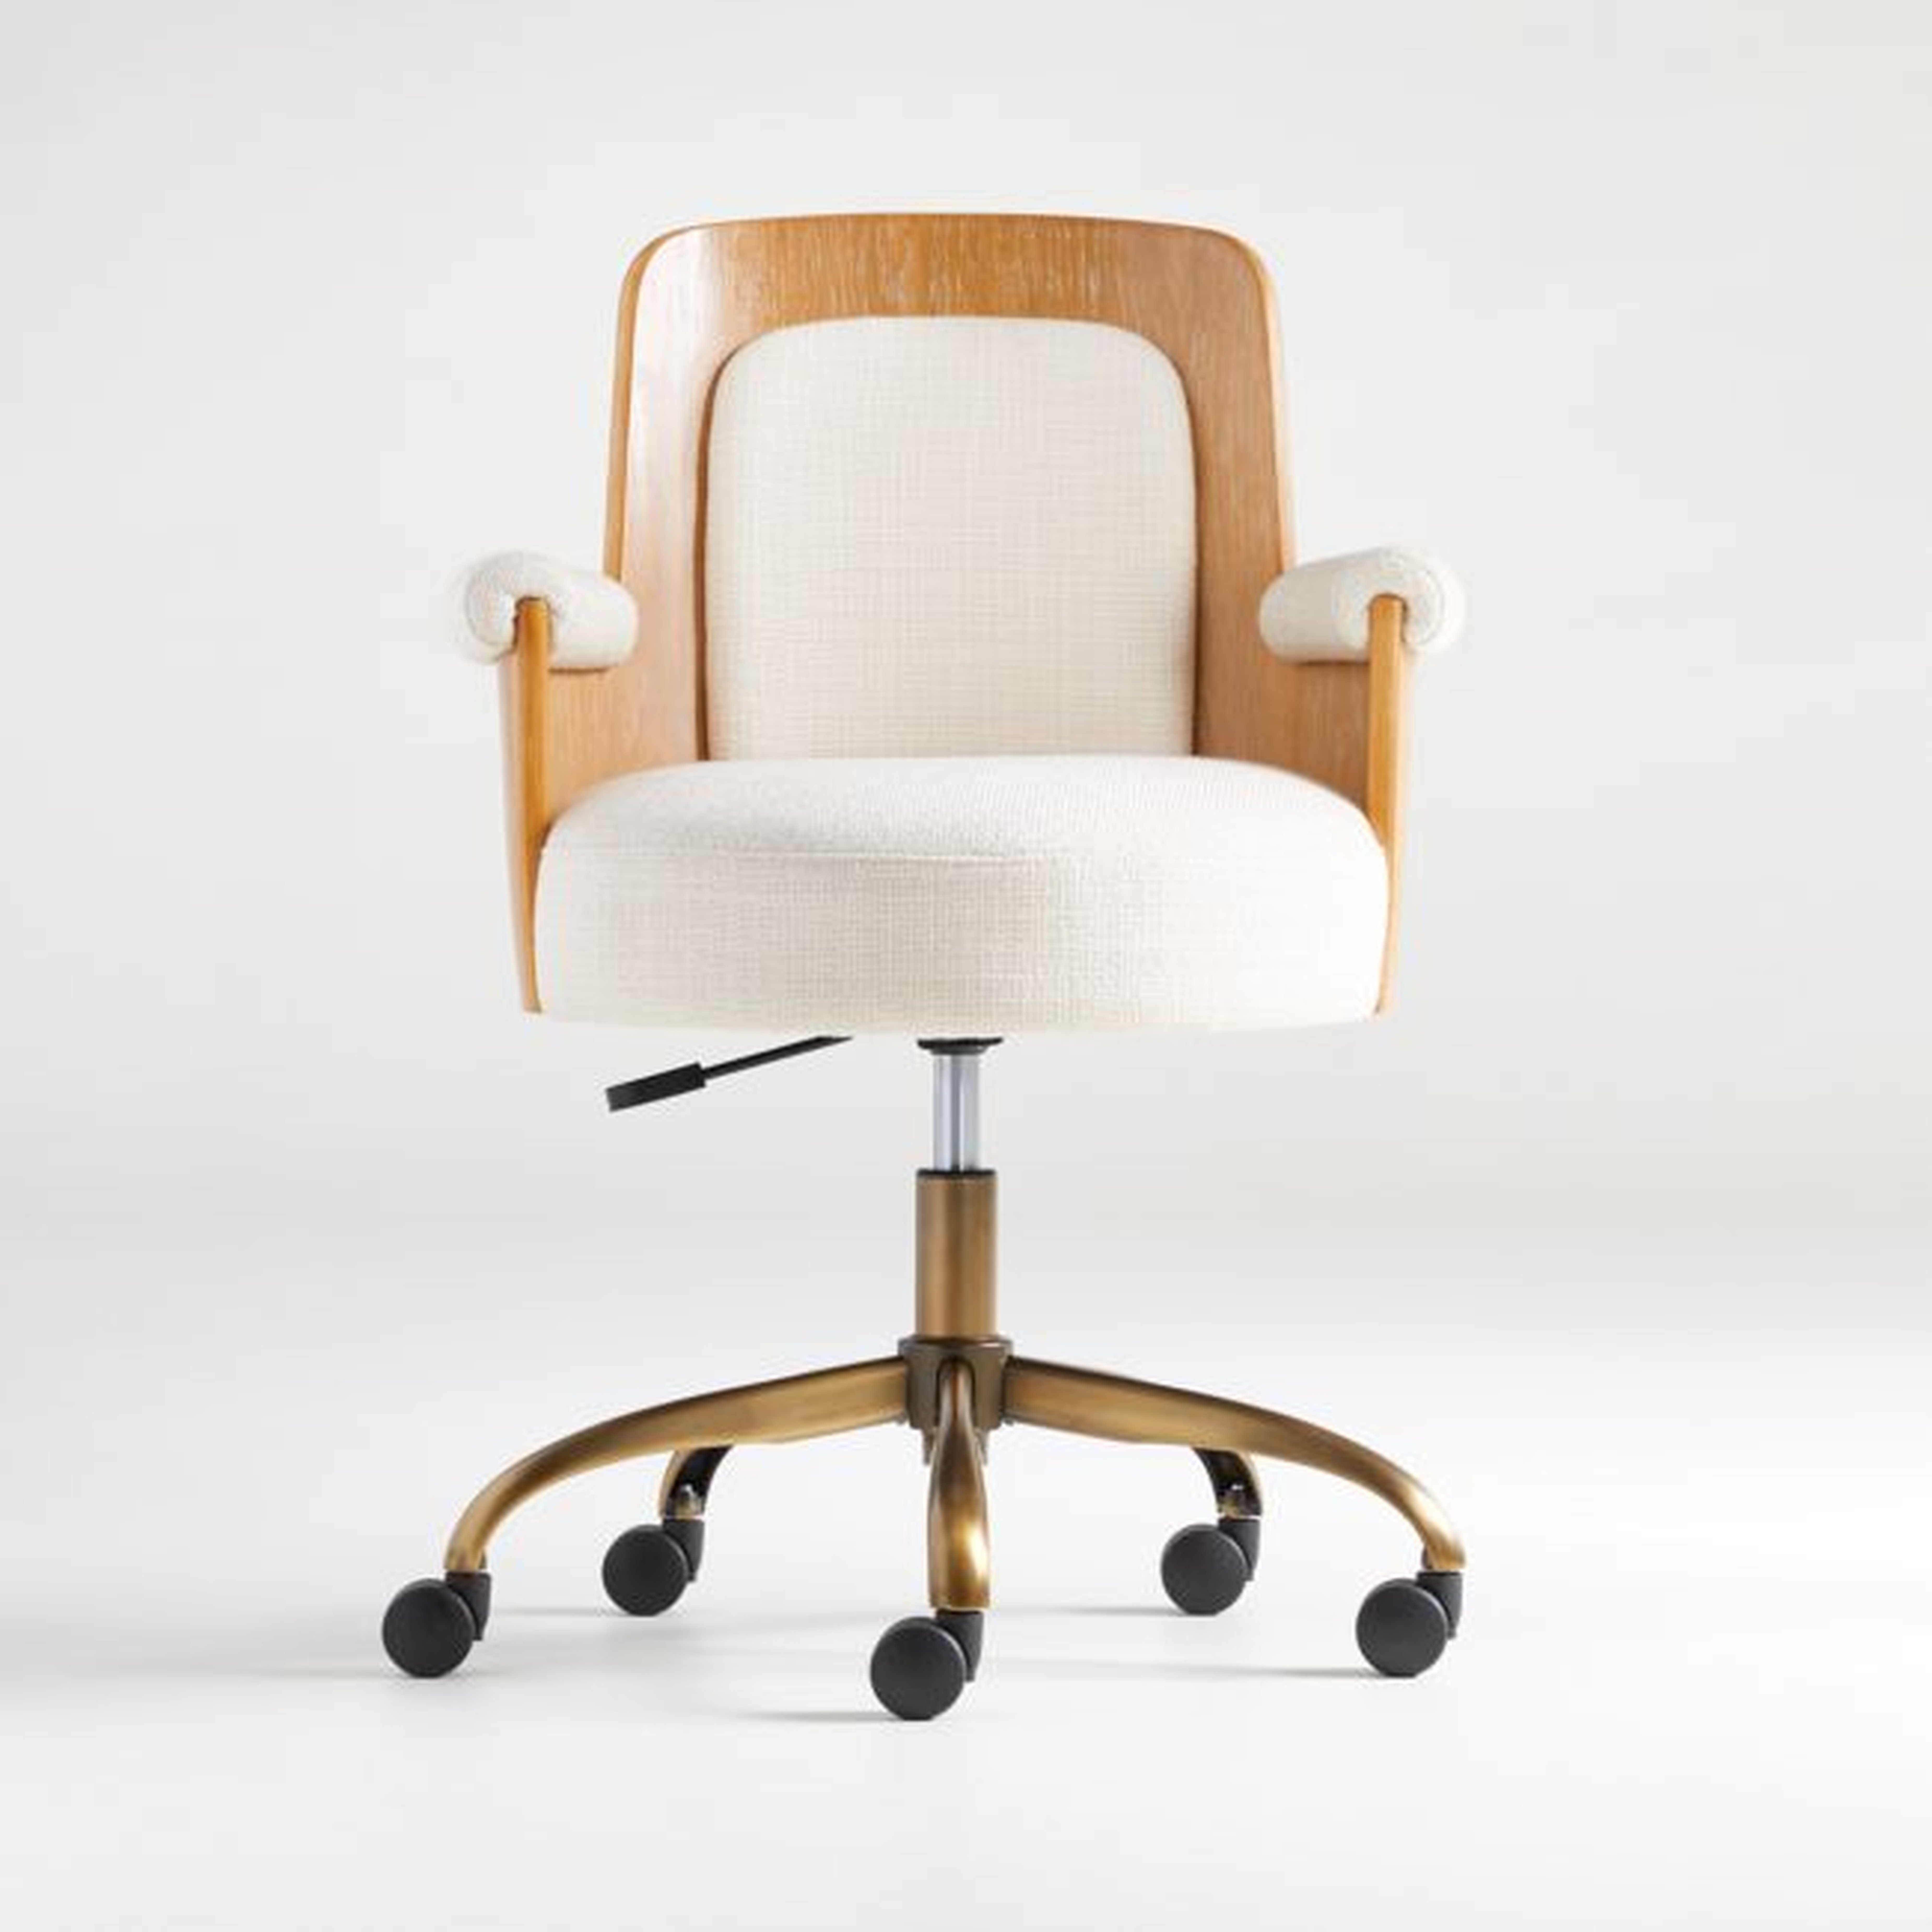 Roan Wood Office Chair - Crate and Barrel